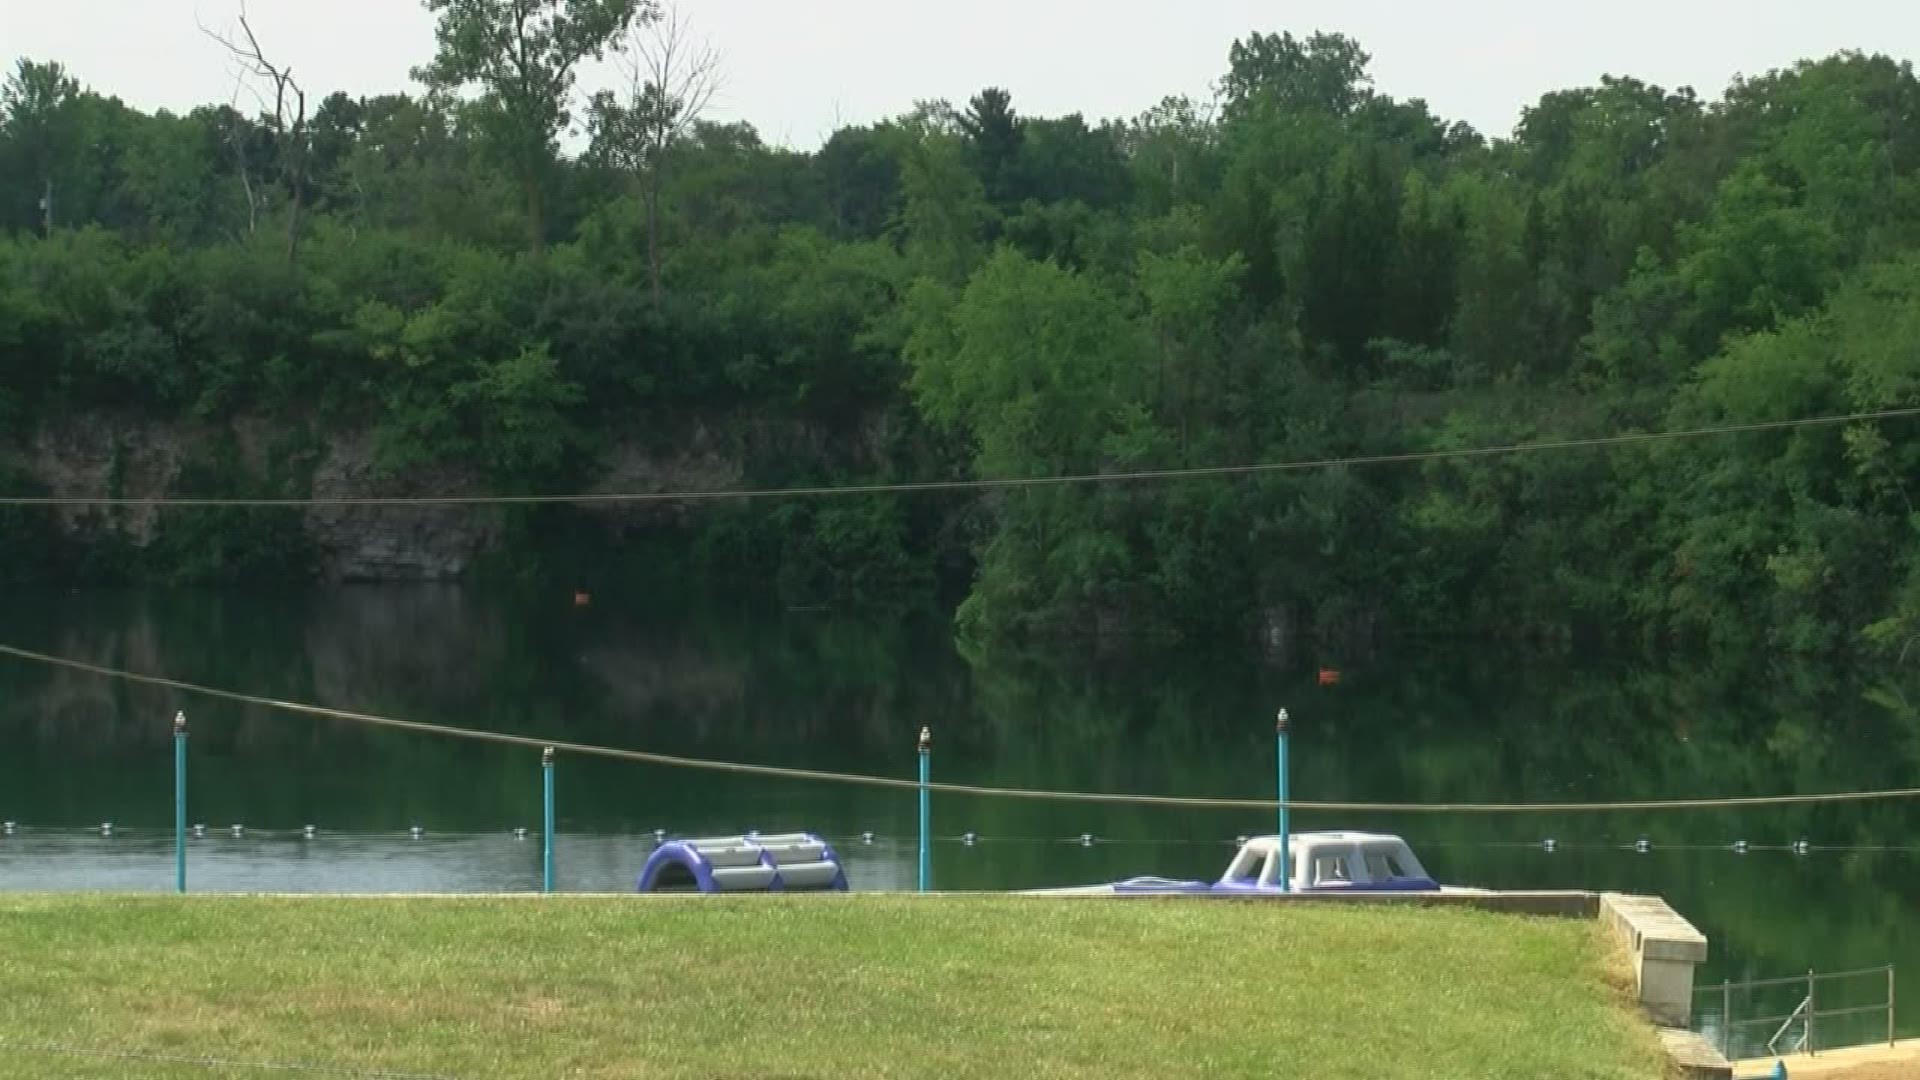 Pedro Salinas jumped into the quarry Monday and did not resurface.